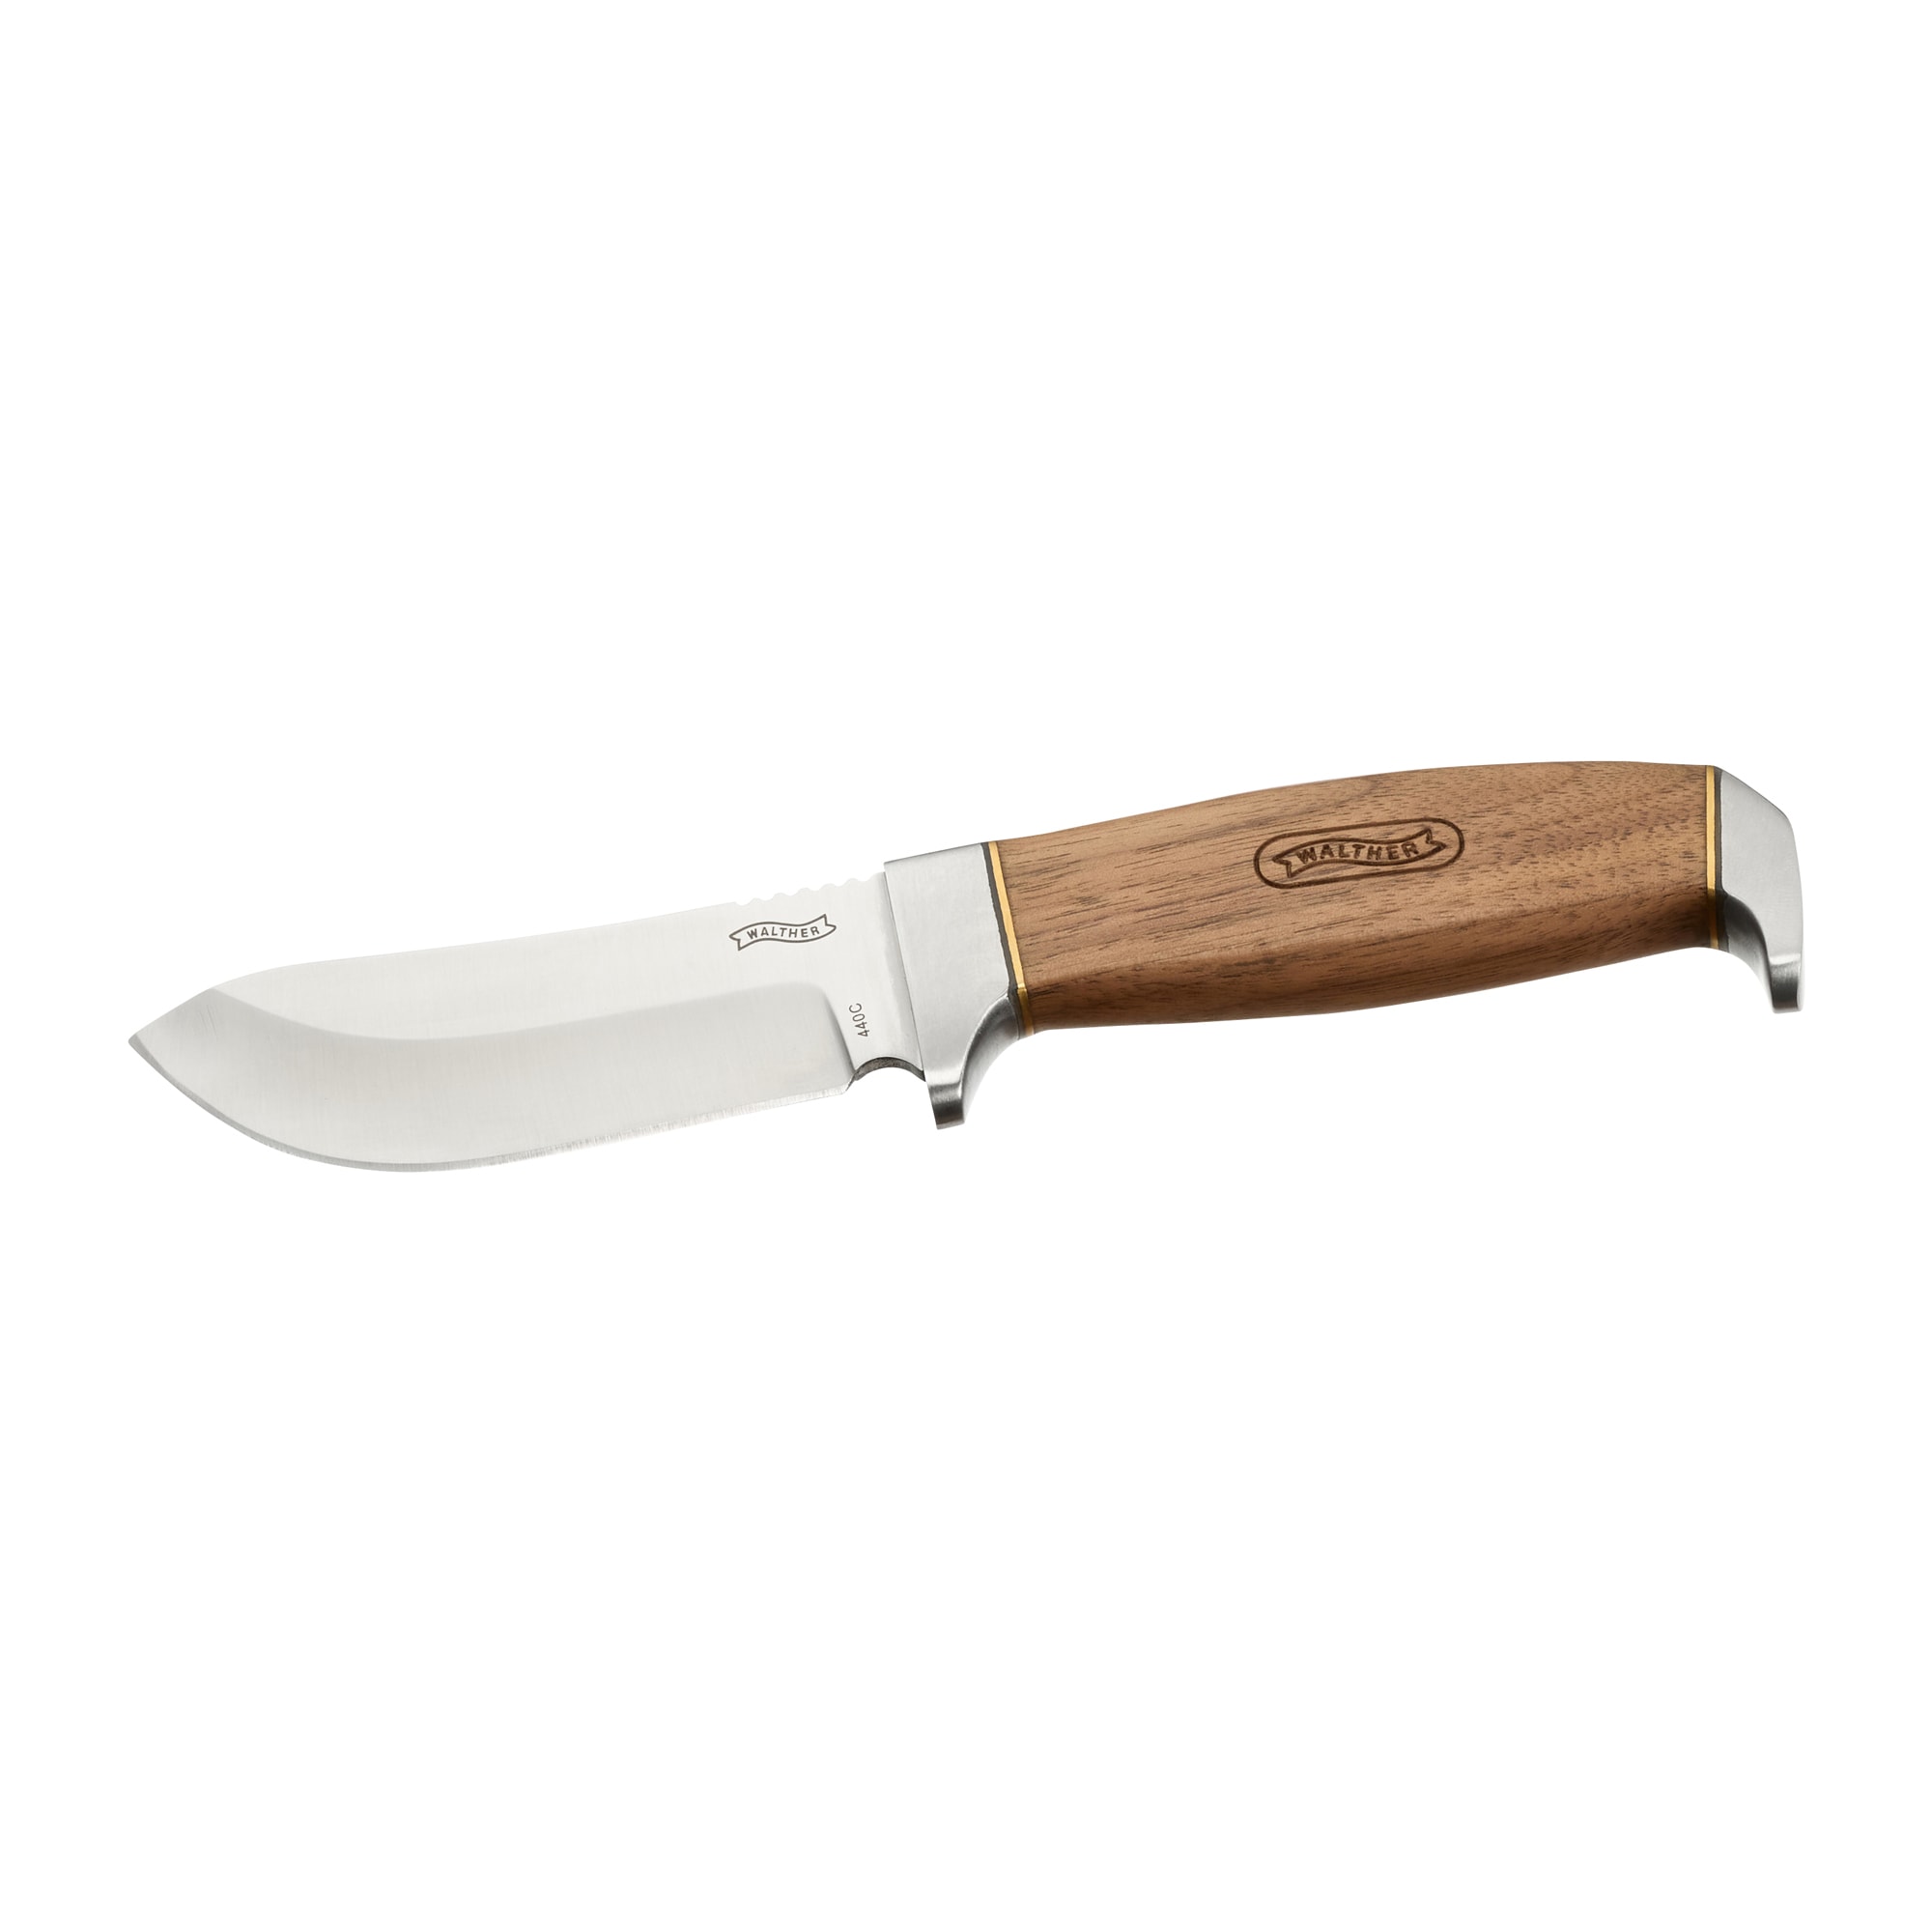 Purchase the Walther Knife Skinner by ASMC